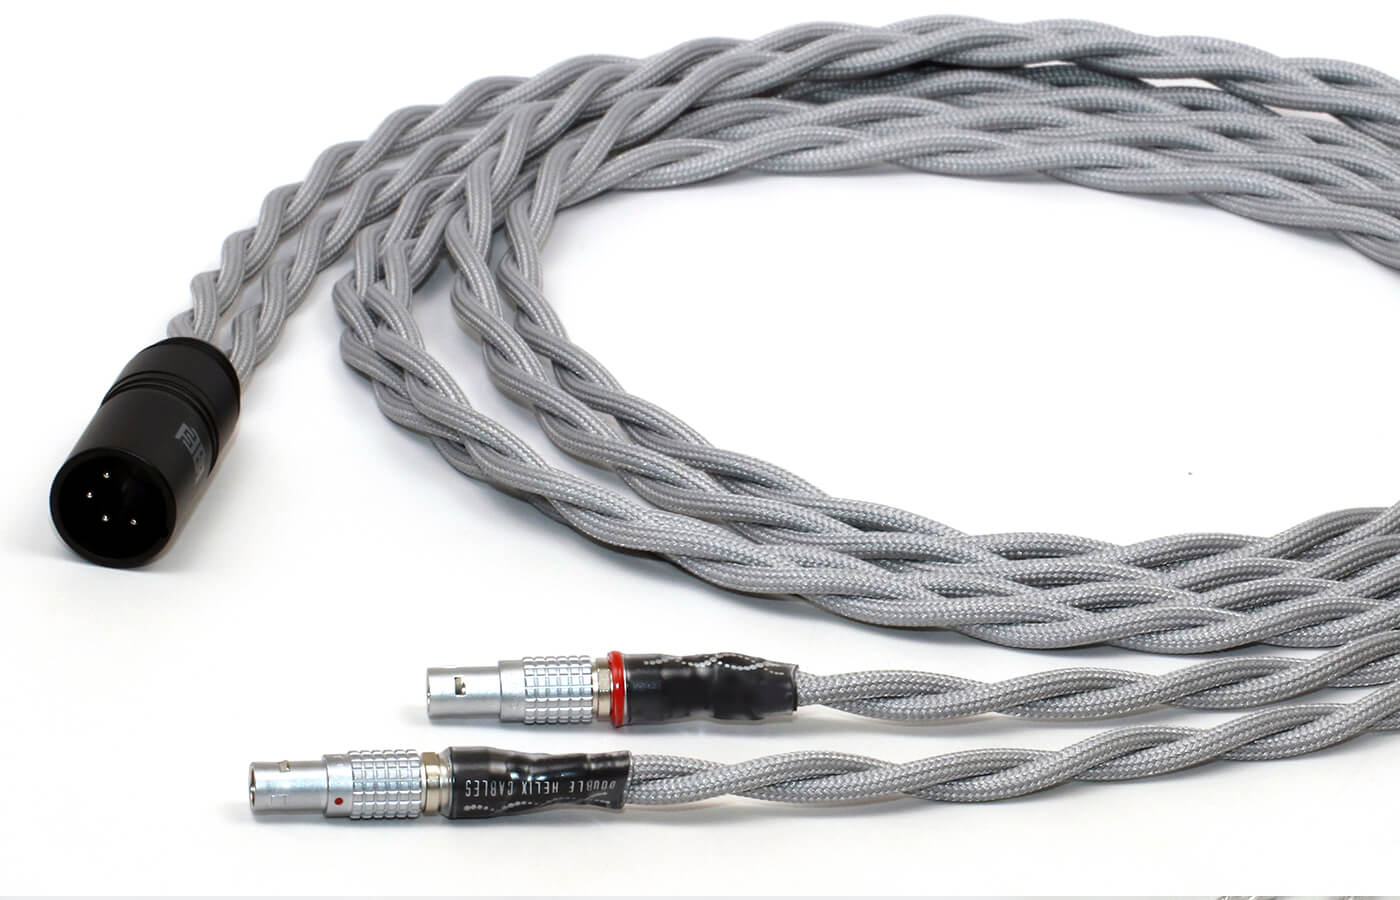 double-helix-cables-dhc-occ-litz-headphone-cable-eidolic-complement4-prion4-utopia-focal